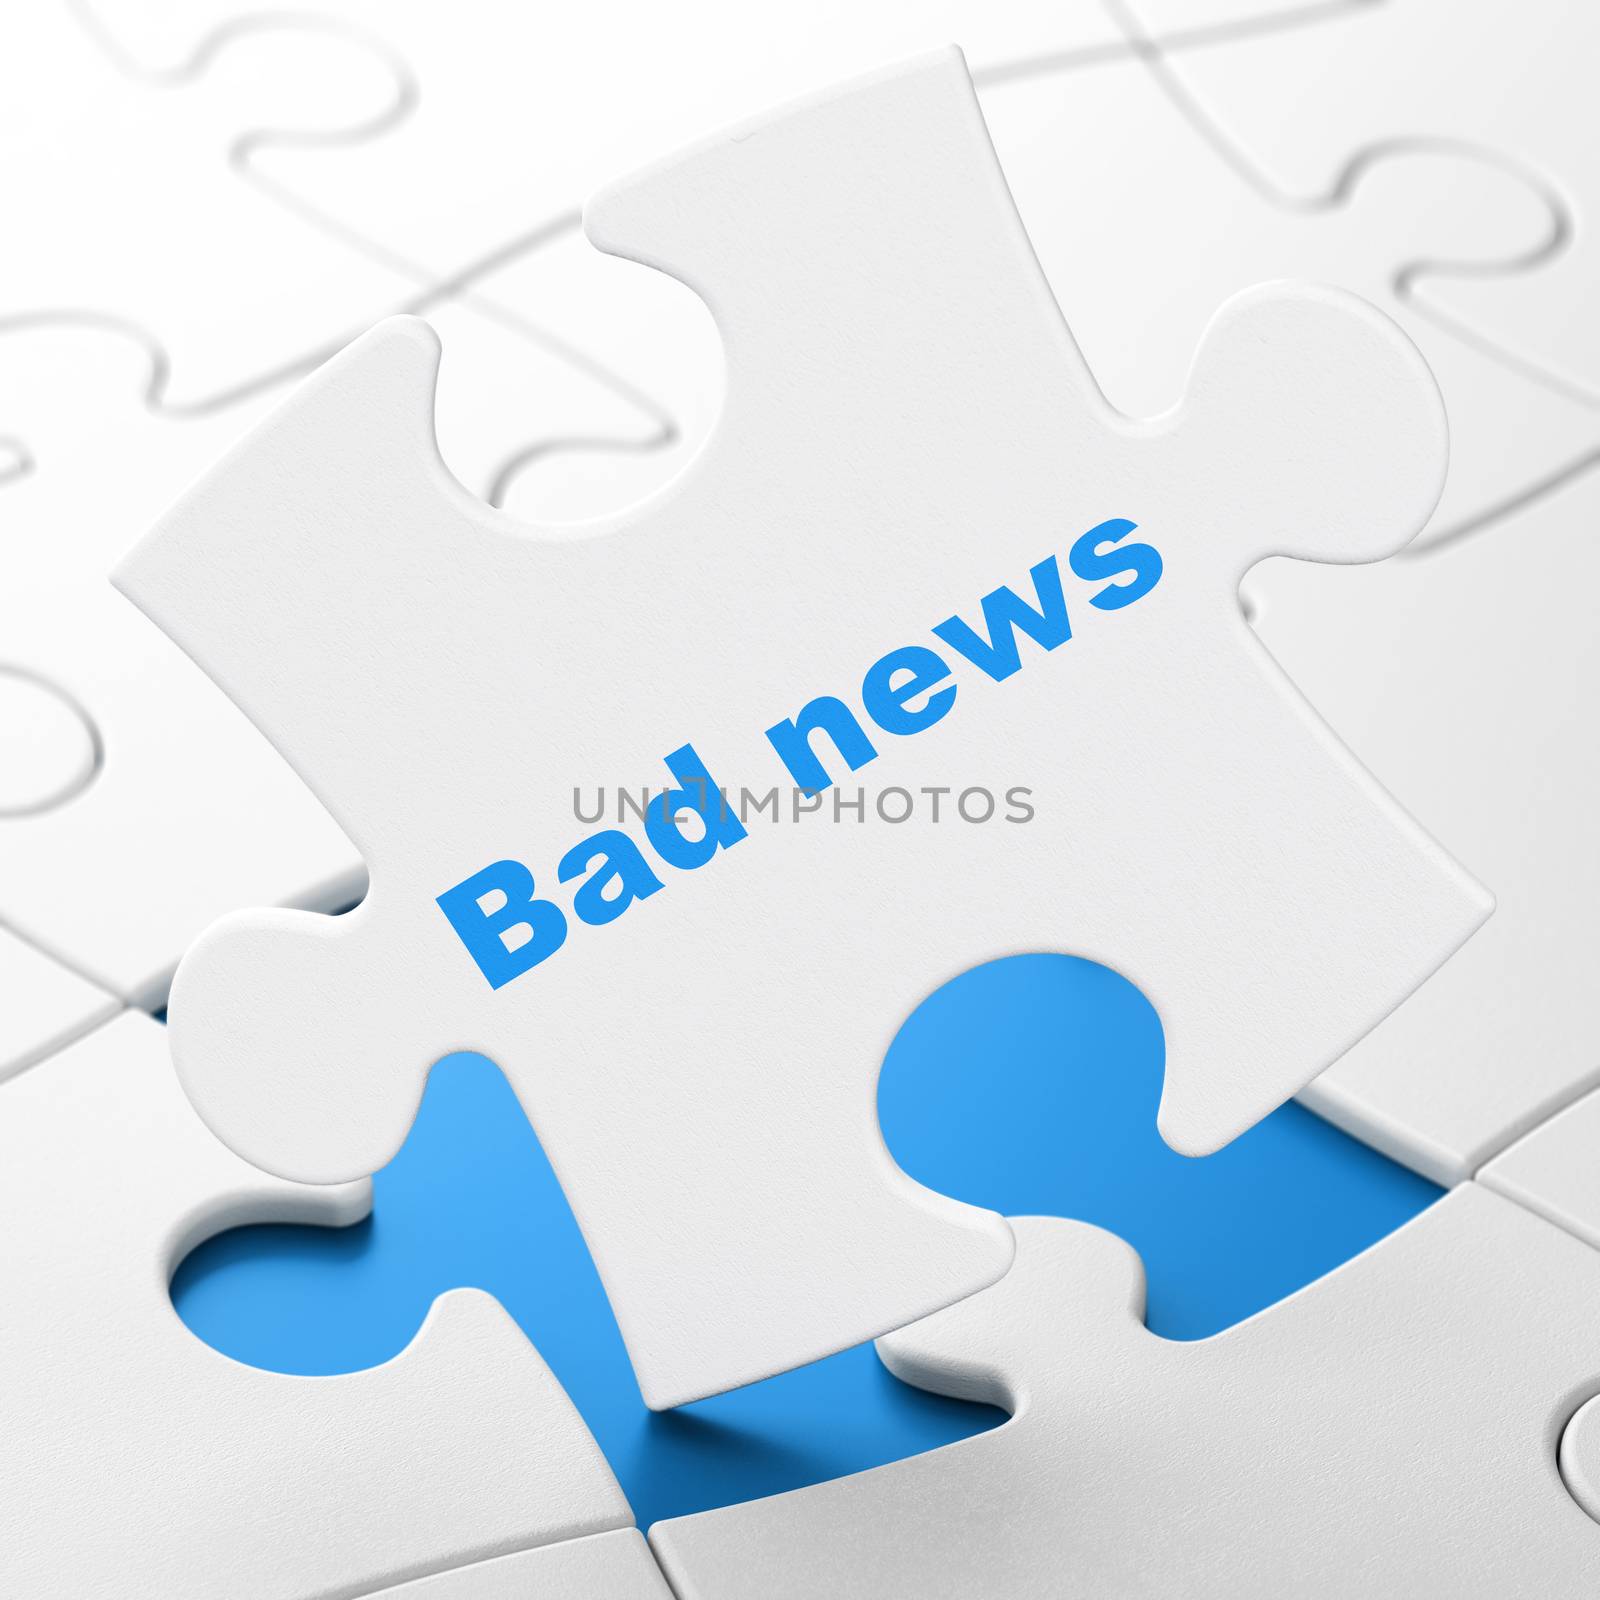 News concept: Bad News on puzzle background by maxkabakov